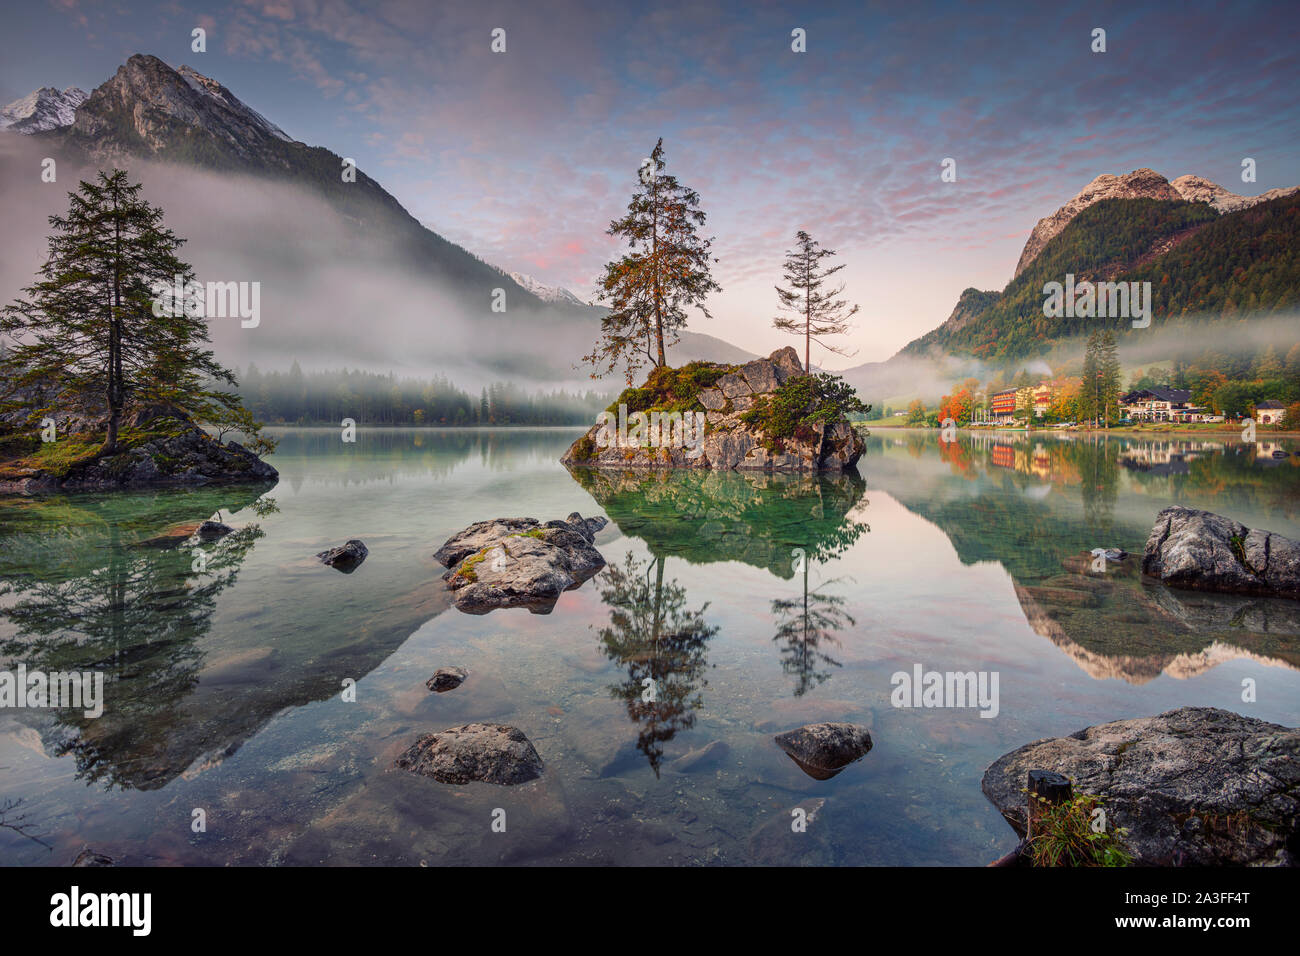 Lake Hintersee, German Alps, Germany. Image of Lake Hintersee located in southern Bavaria, Germany during autumn sunrise. Stock Photo